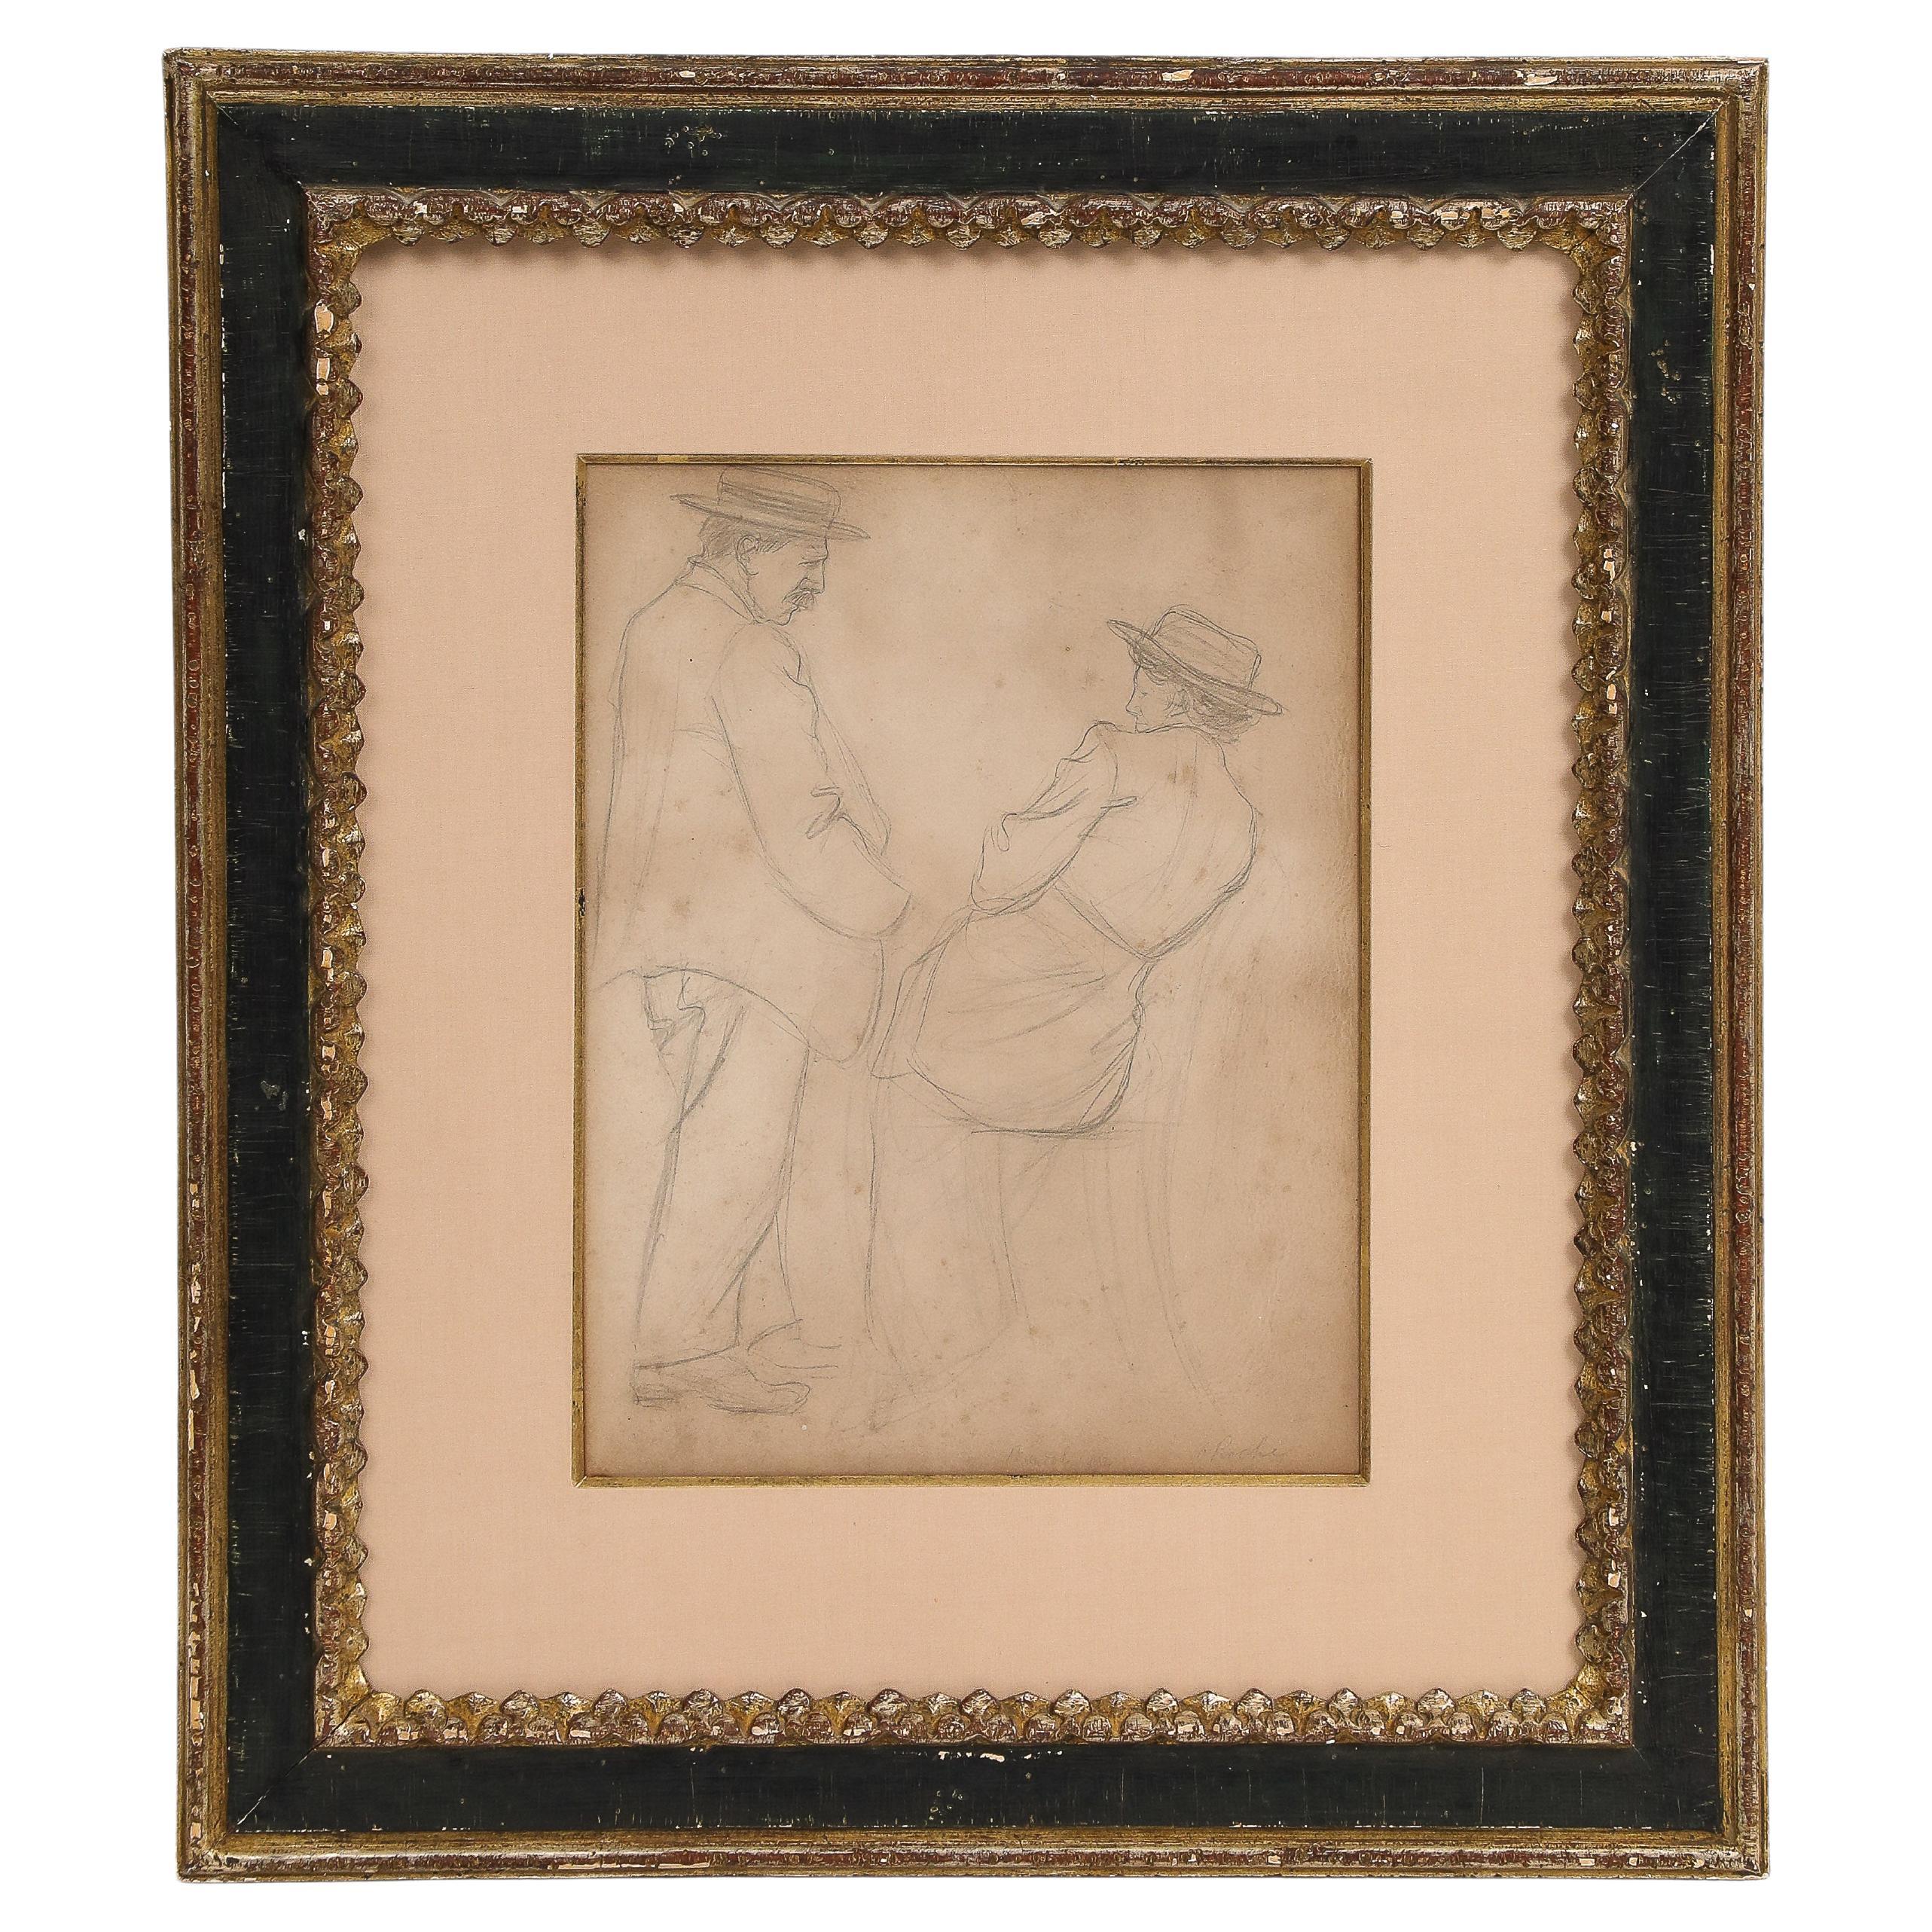 Odilon Roche Signed Drawing on Paper, "Sketch of Couple, Bandol, France", 1934